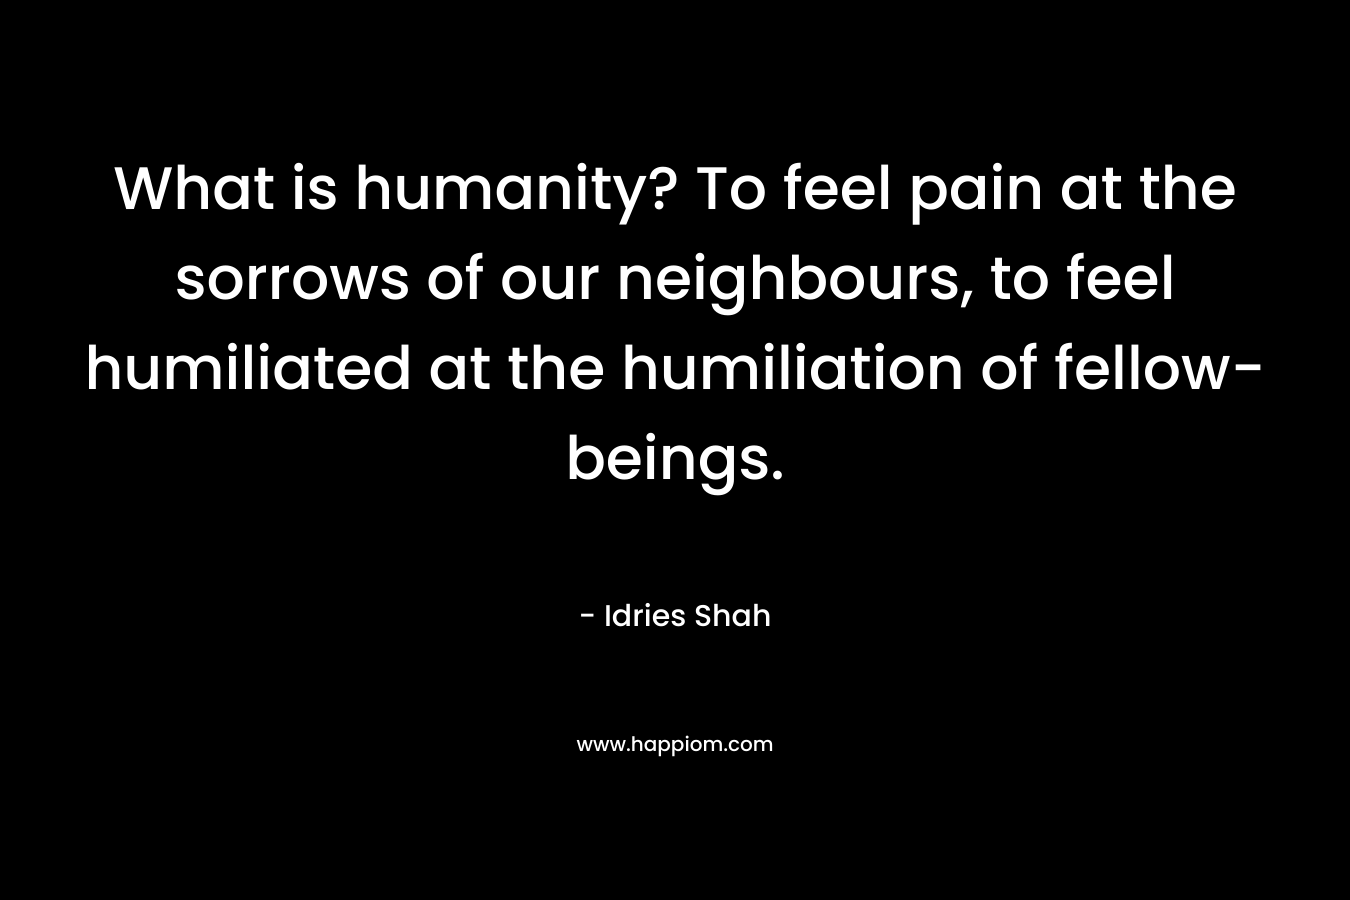 What is humanity? To feel pain at the sorrows of our neighbours, to feel humiliated at the humiliation of fellow-beings.